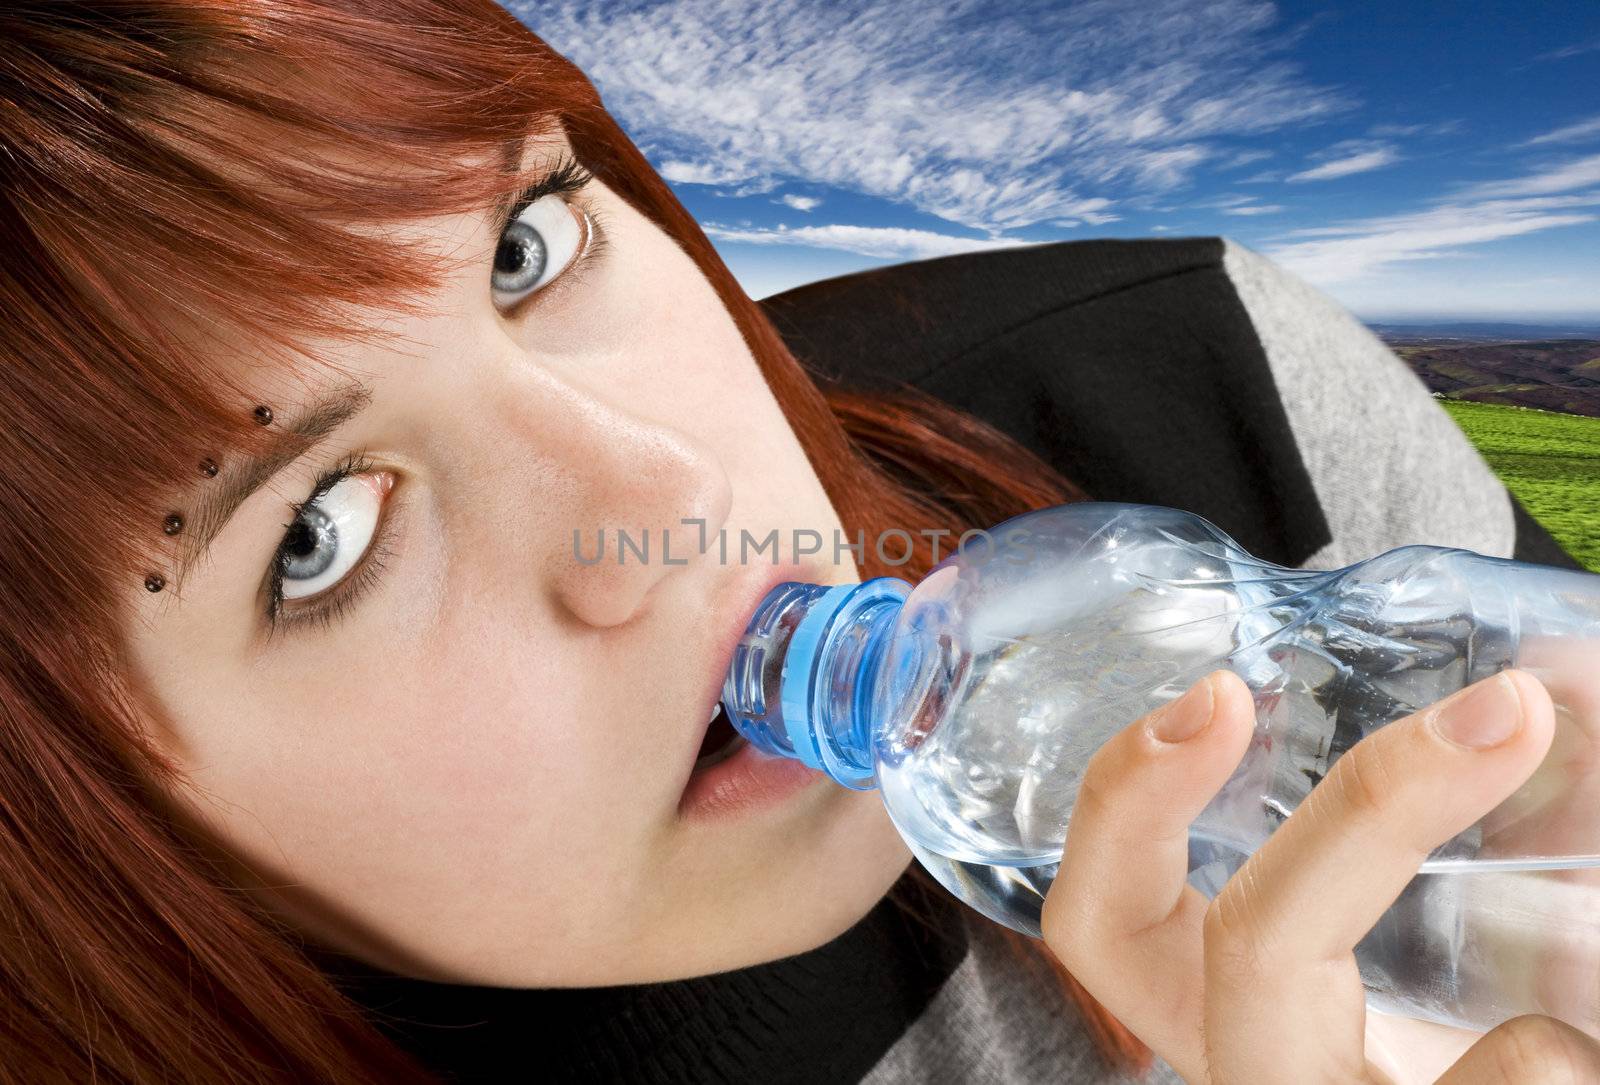 Seductive redhead girl looking at camera and drinking a bottle of water.

Studio shot.